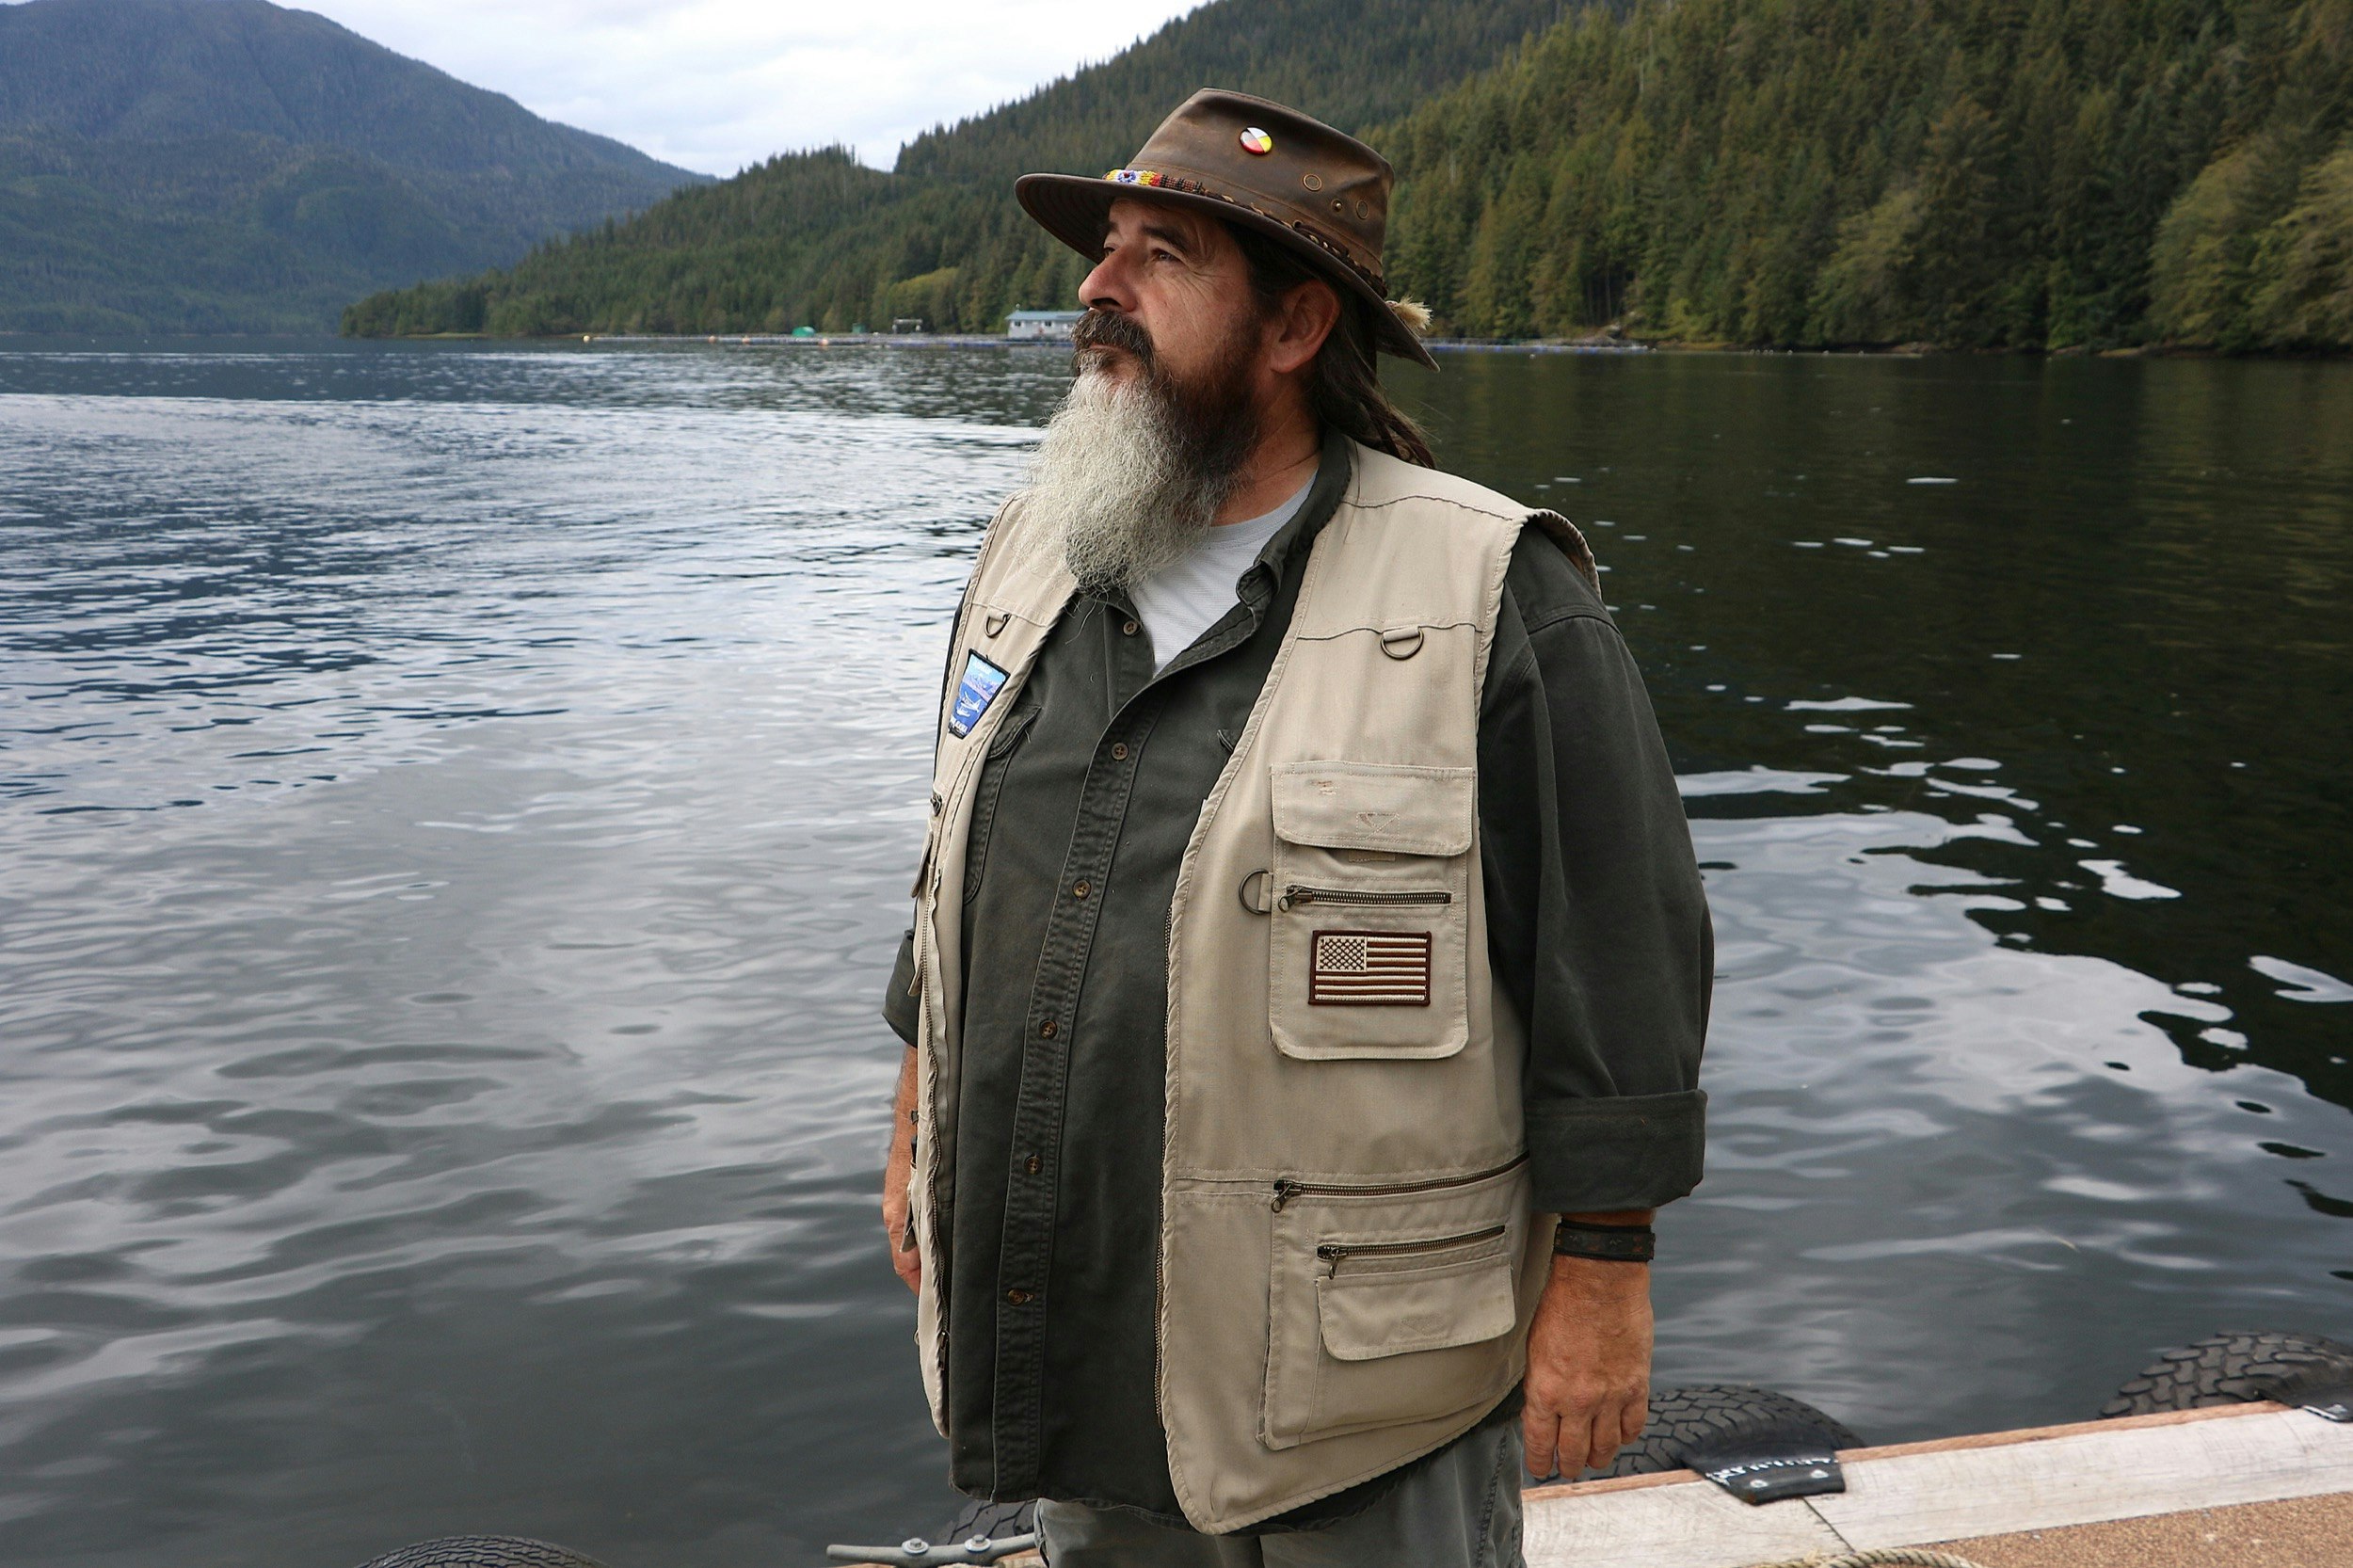 A guide with a long beard and a vest looks out over the landscape in Alaska's Tongass National Forest